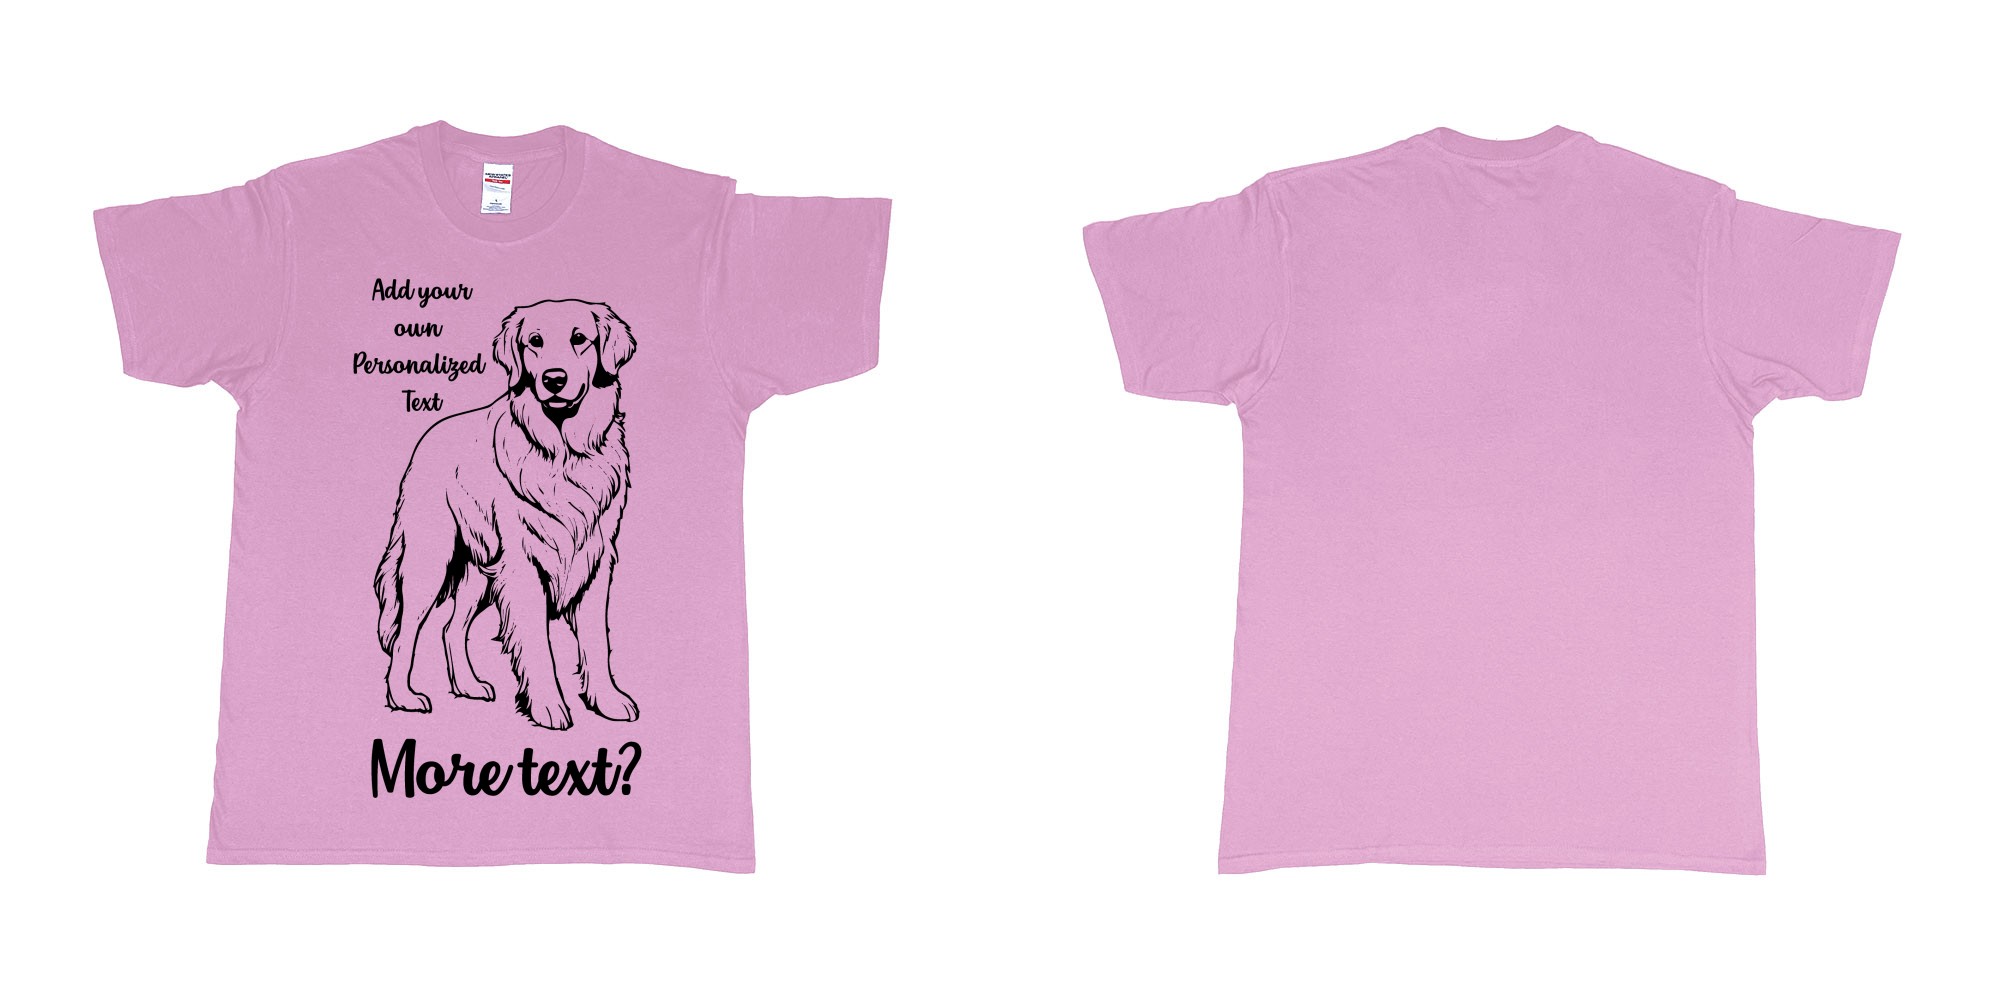 Custom tshirt design golden retriever dog breed personalized text in fabric color light-pink choice your own text made in Bali by The Pirate Way